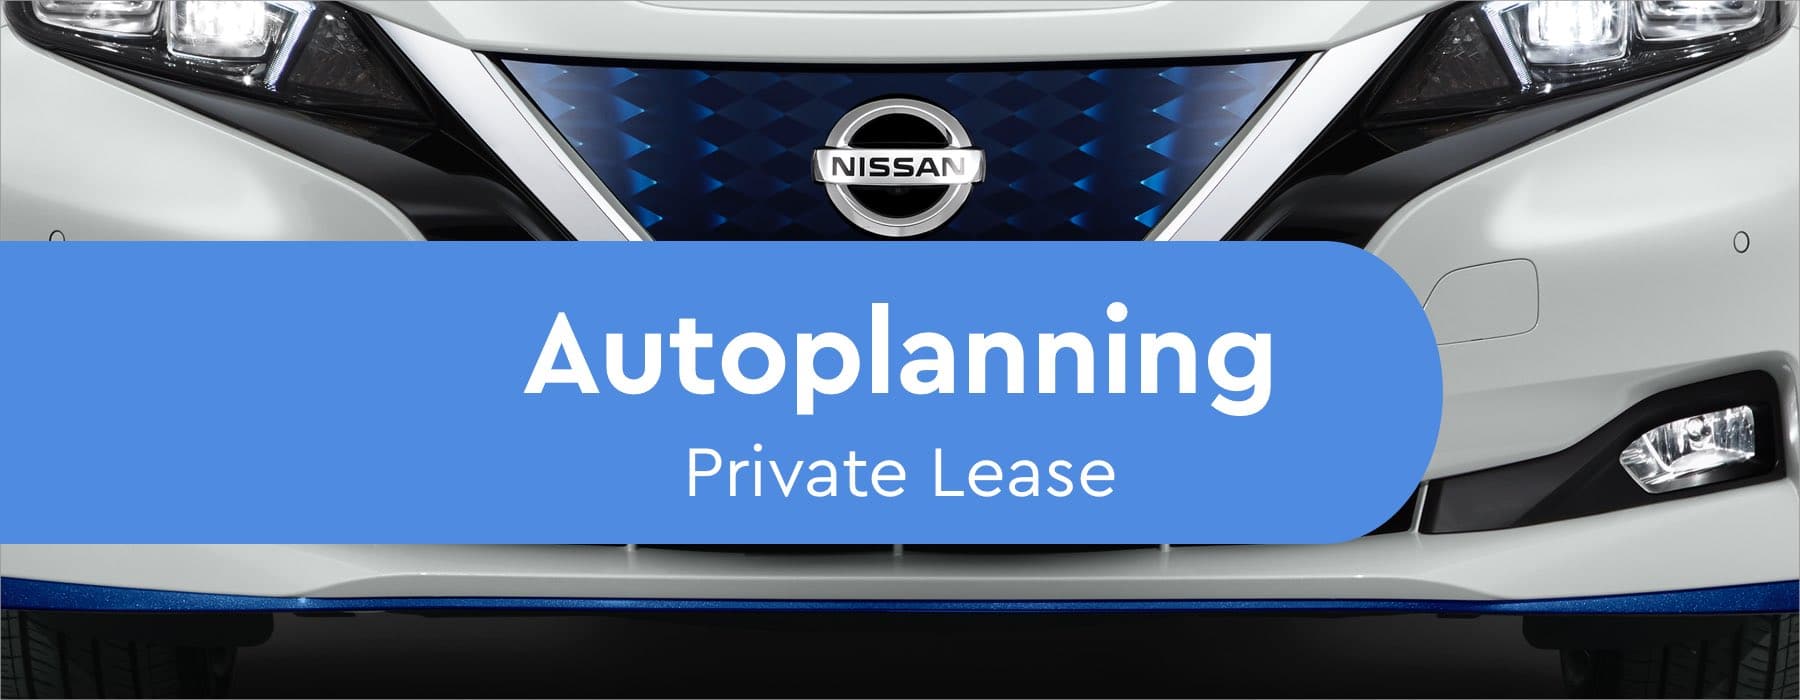 Autoplanning Private Lease